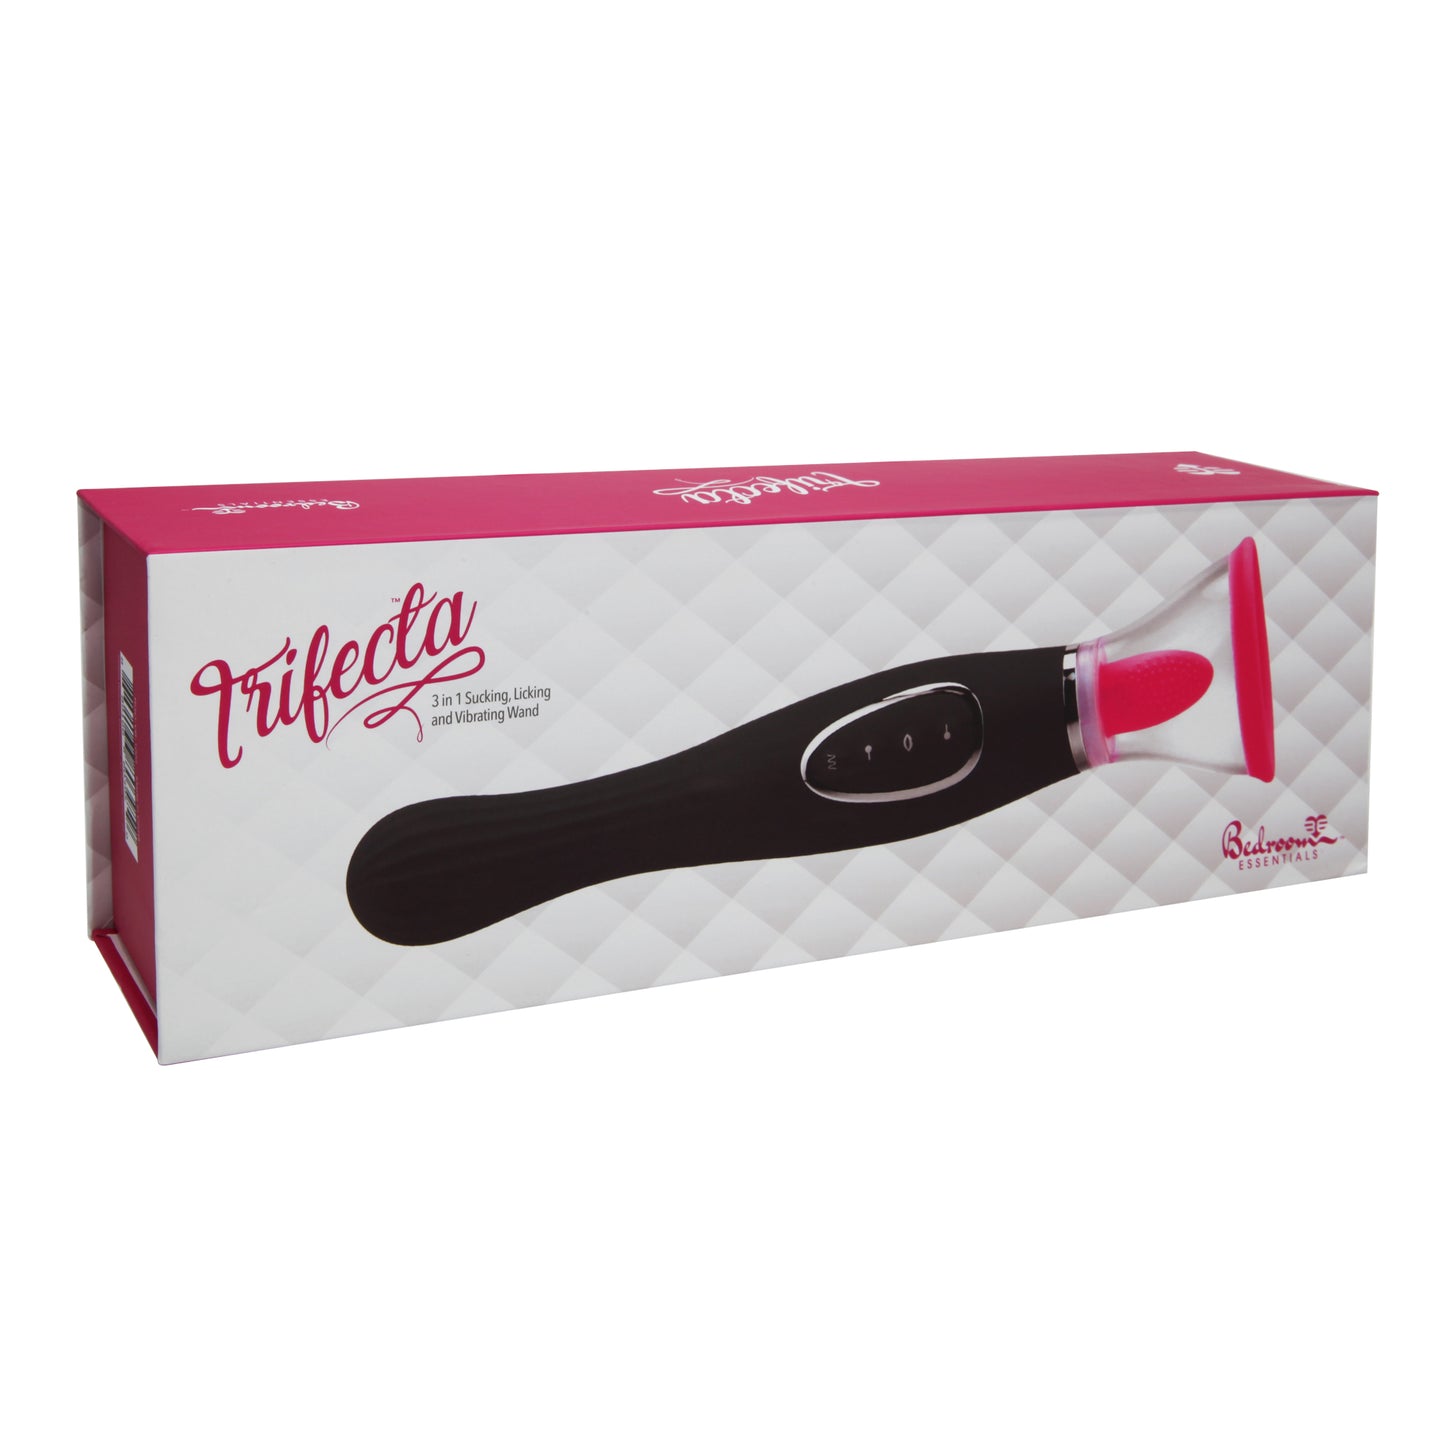 Trifecta 3-In-1 Suction Massager & Vibrator